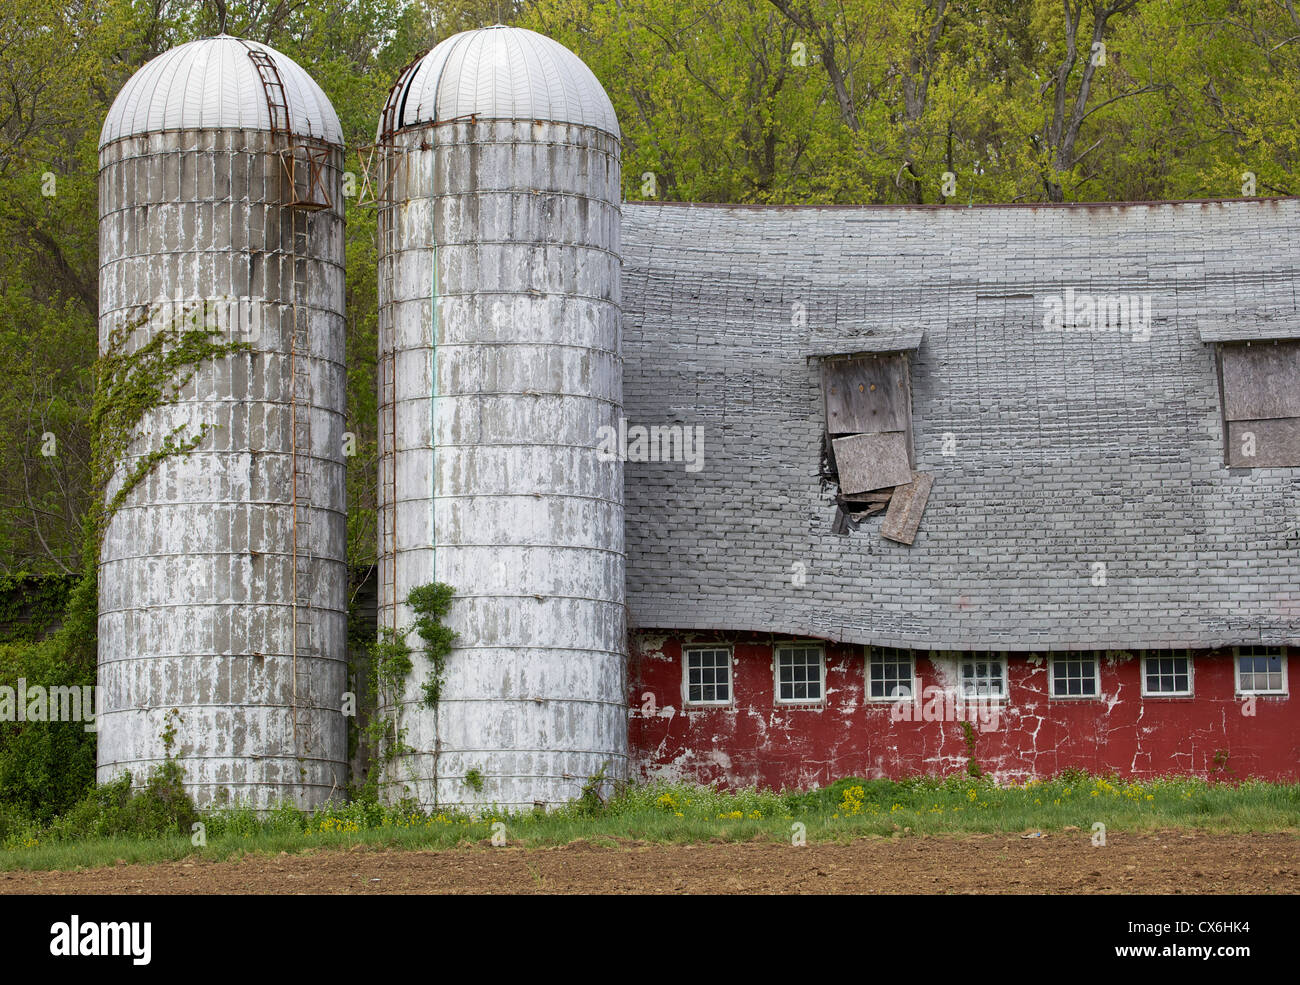 Weathered Red Barn with Grain Silos Stock Photo